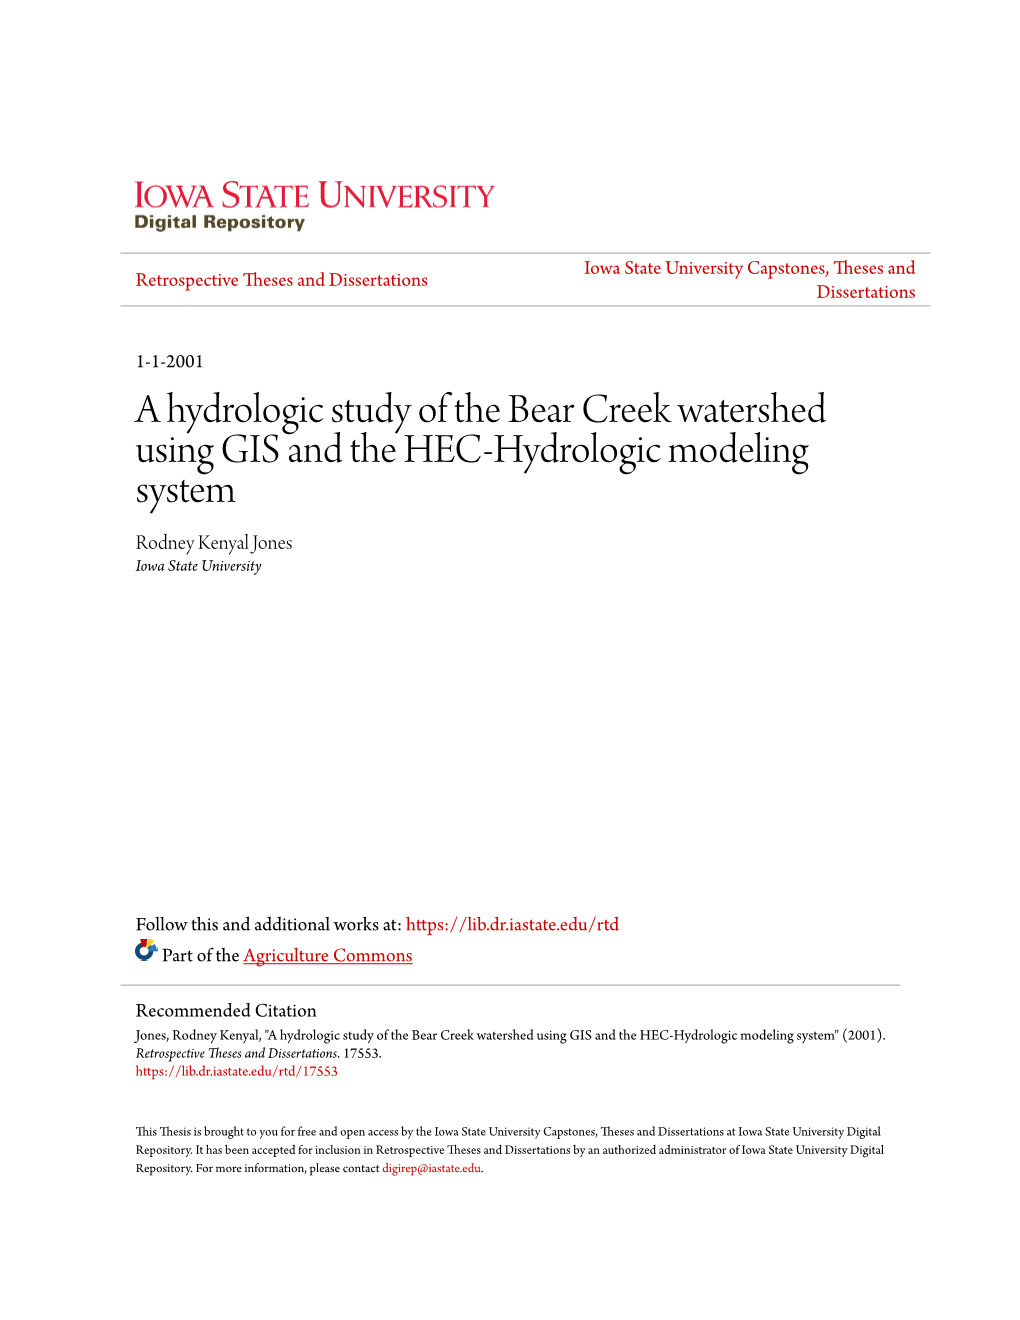 A Hydrologic Study of the Bear Creek Watershed Using GIS and the HEC-Hydrologic Modeling System Rodney Kenyal Jones Iowa State University